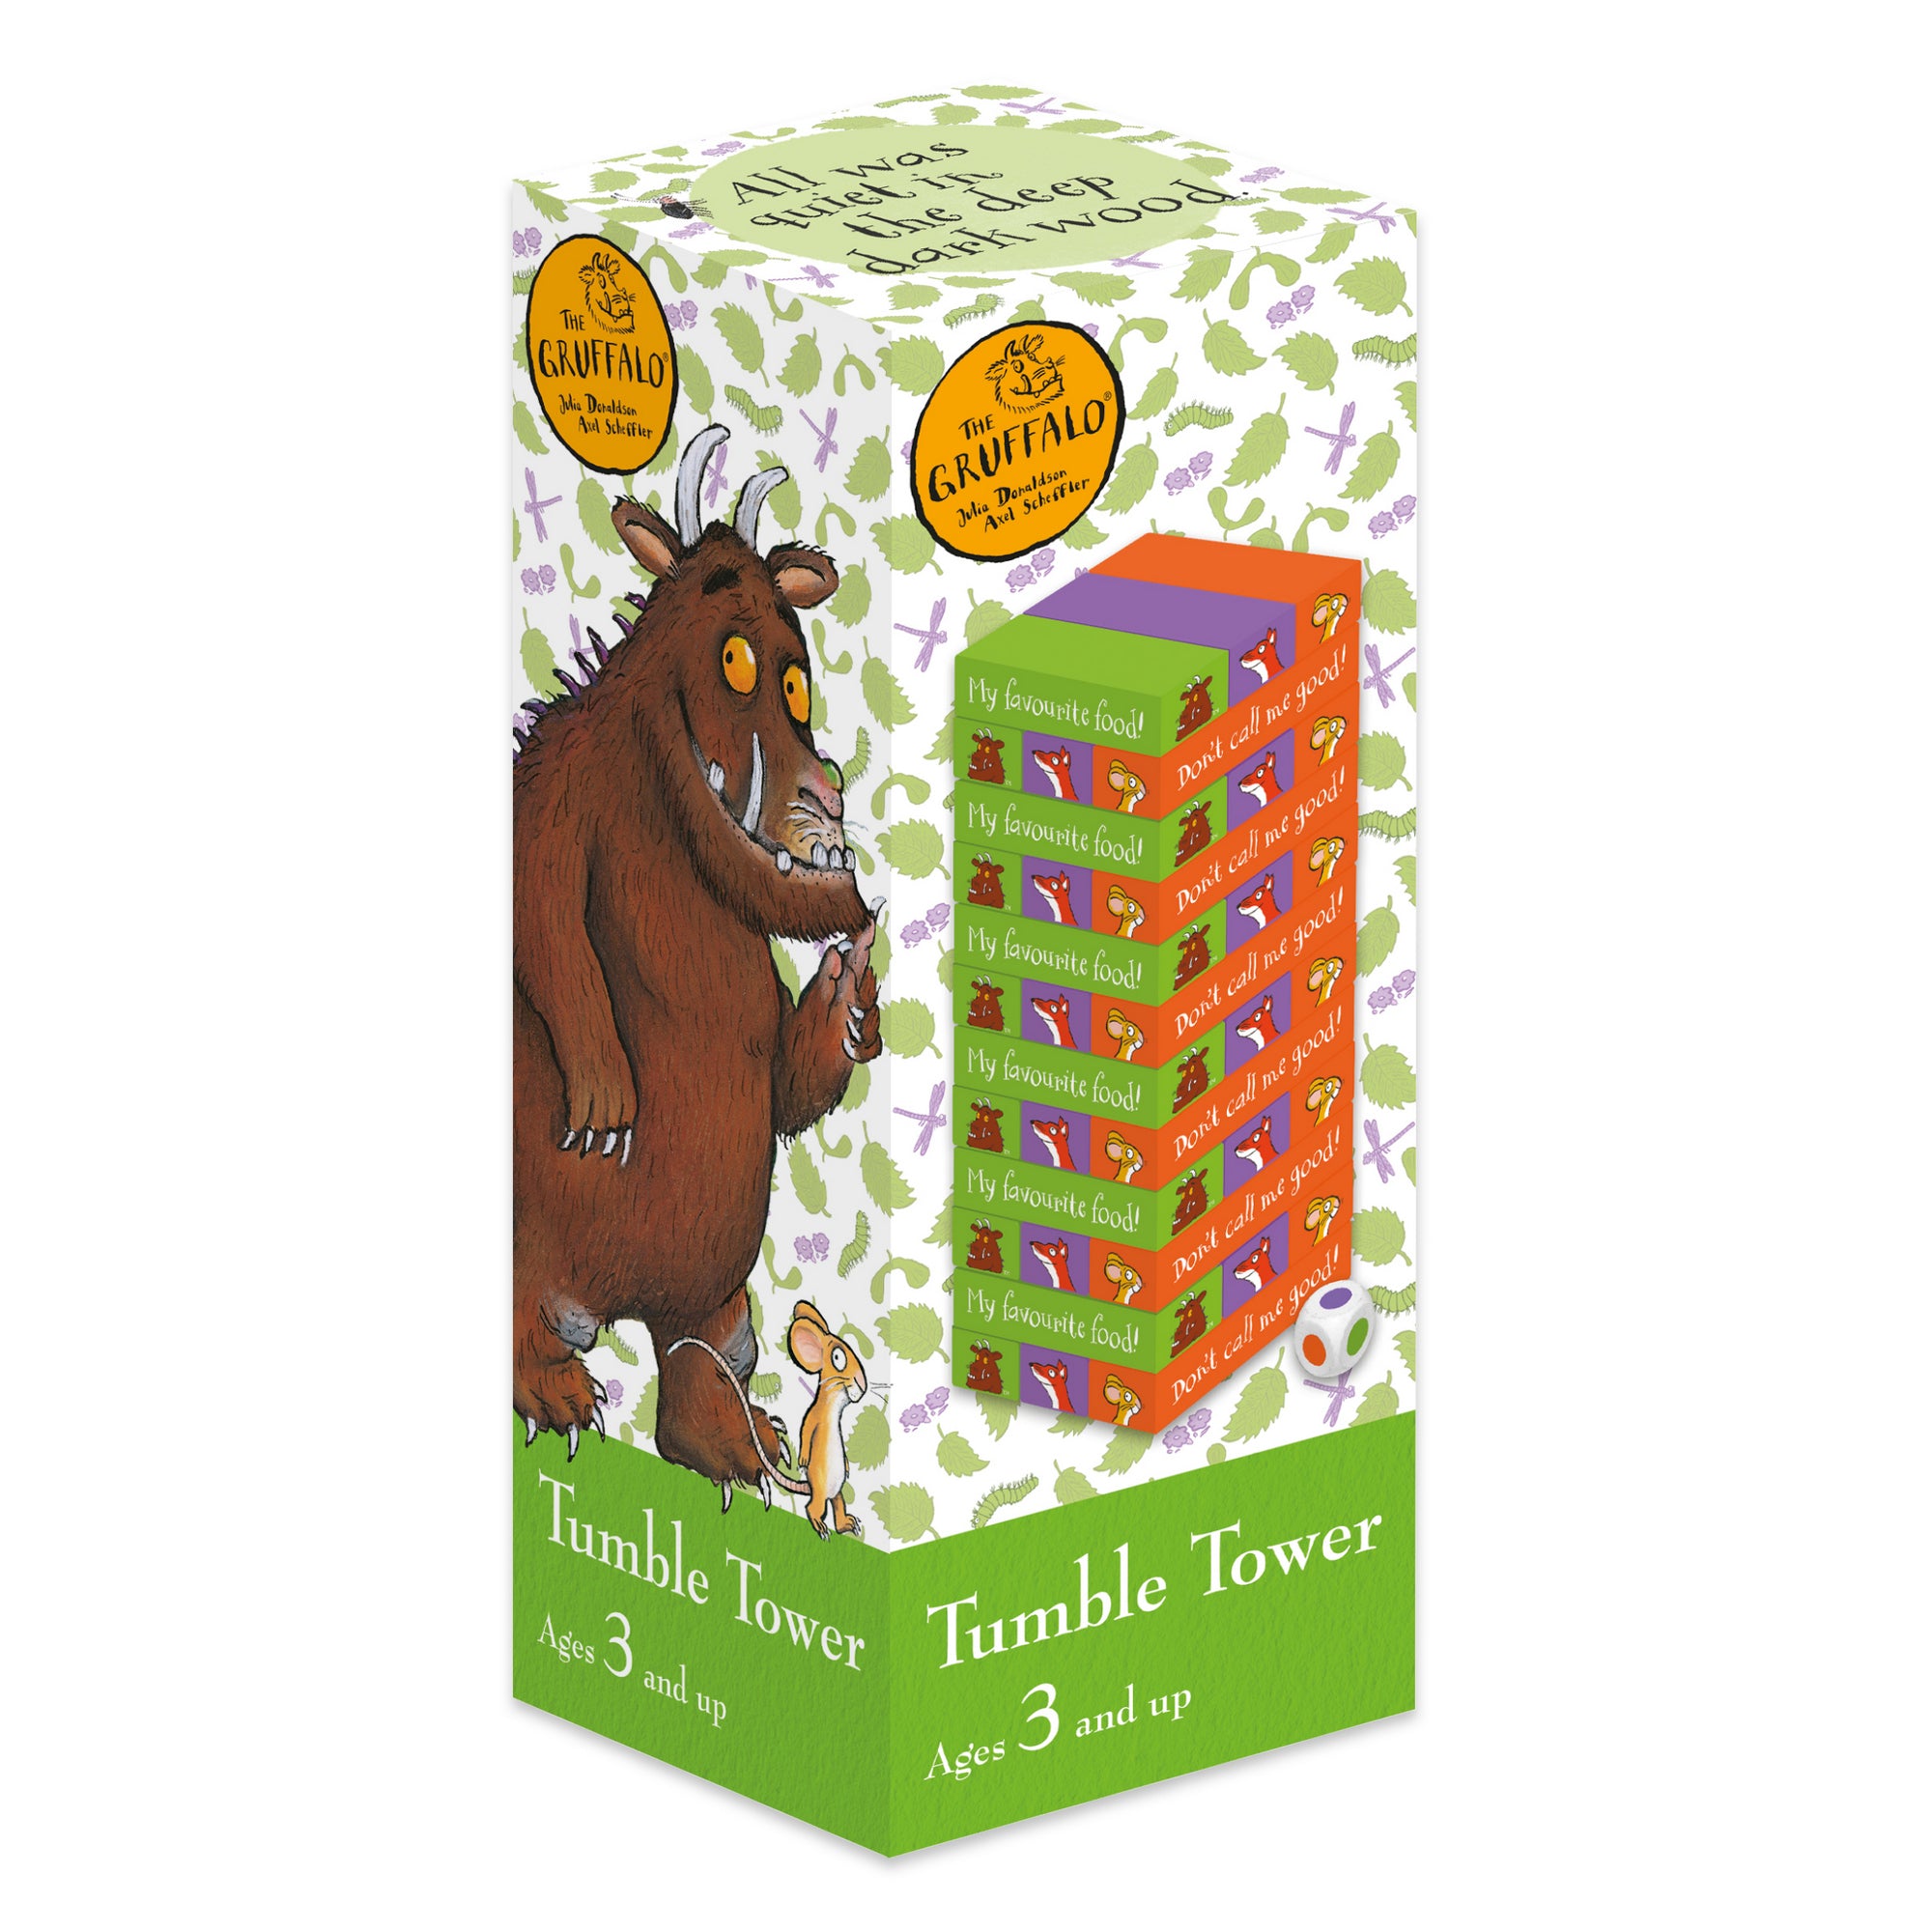 Gruffalo Painted Tumble Tower with Dice Game